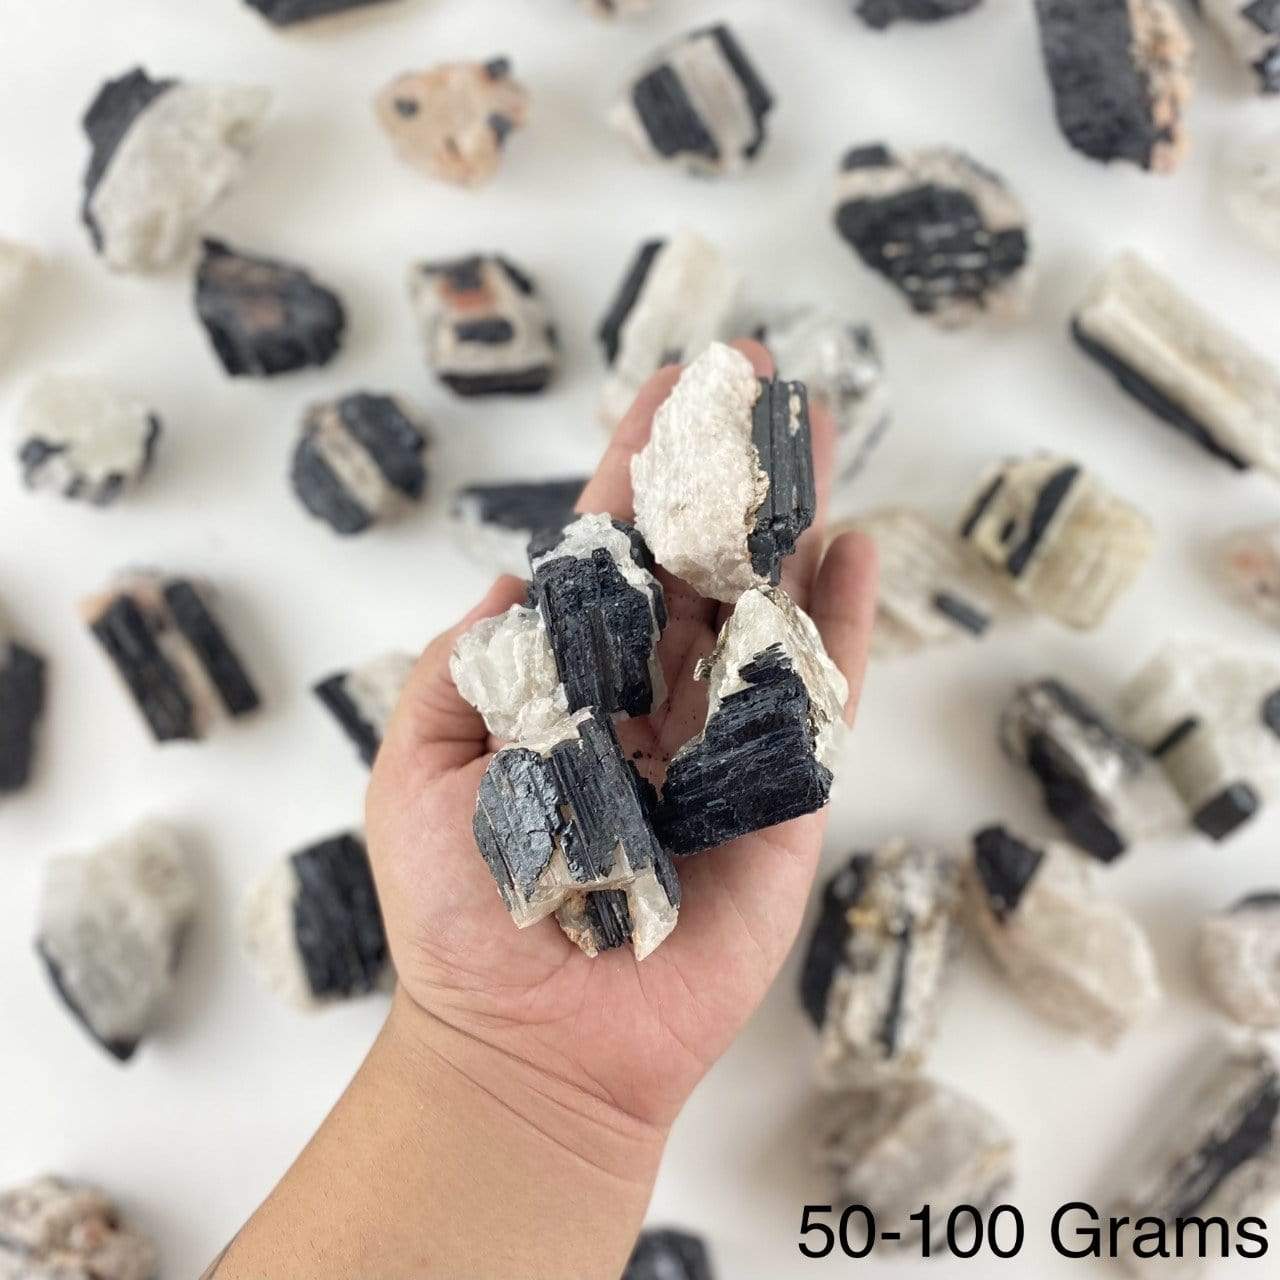 black tourmaline on matrix displayed in hand size is for 50-100 grams